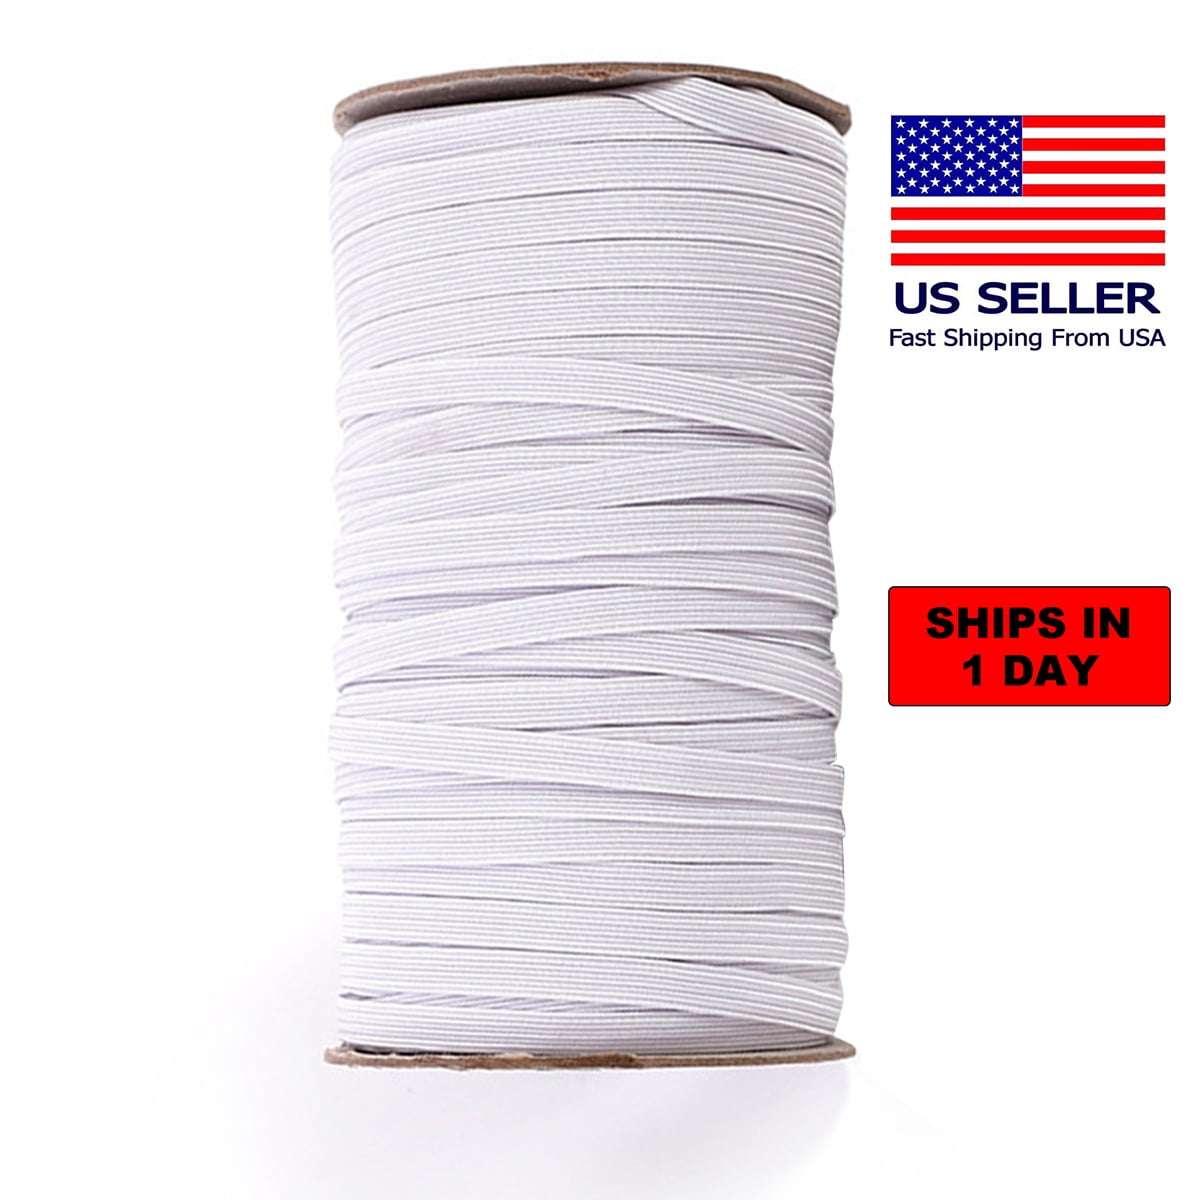 5 Metre Long Stretchy Cord for Skirts and Trousers Waistbands Trimming Shop 25mm Wide White Elastic Ribbon for Sewing and Crafts Spool of Elastic Flat Band for Clothing